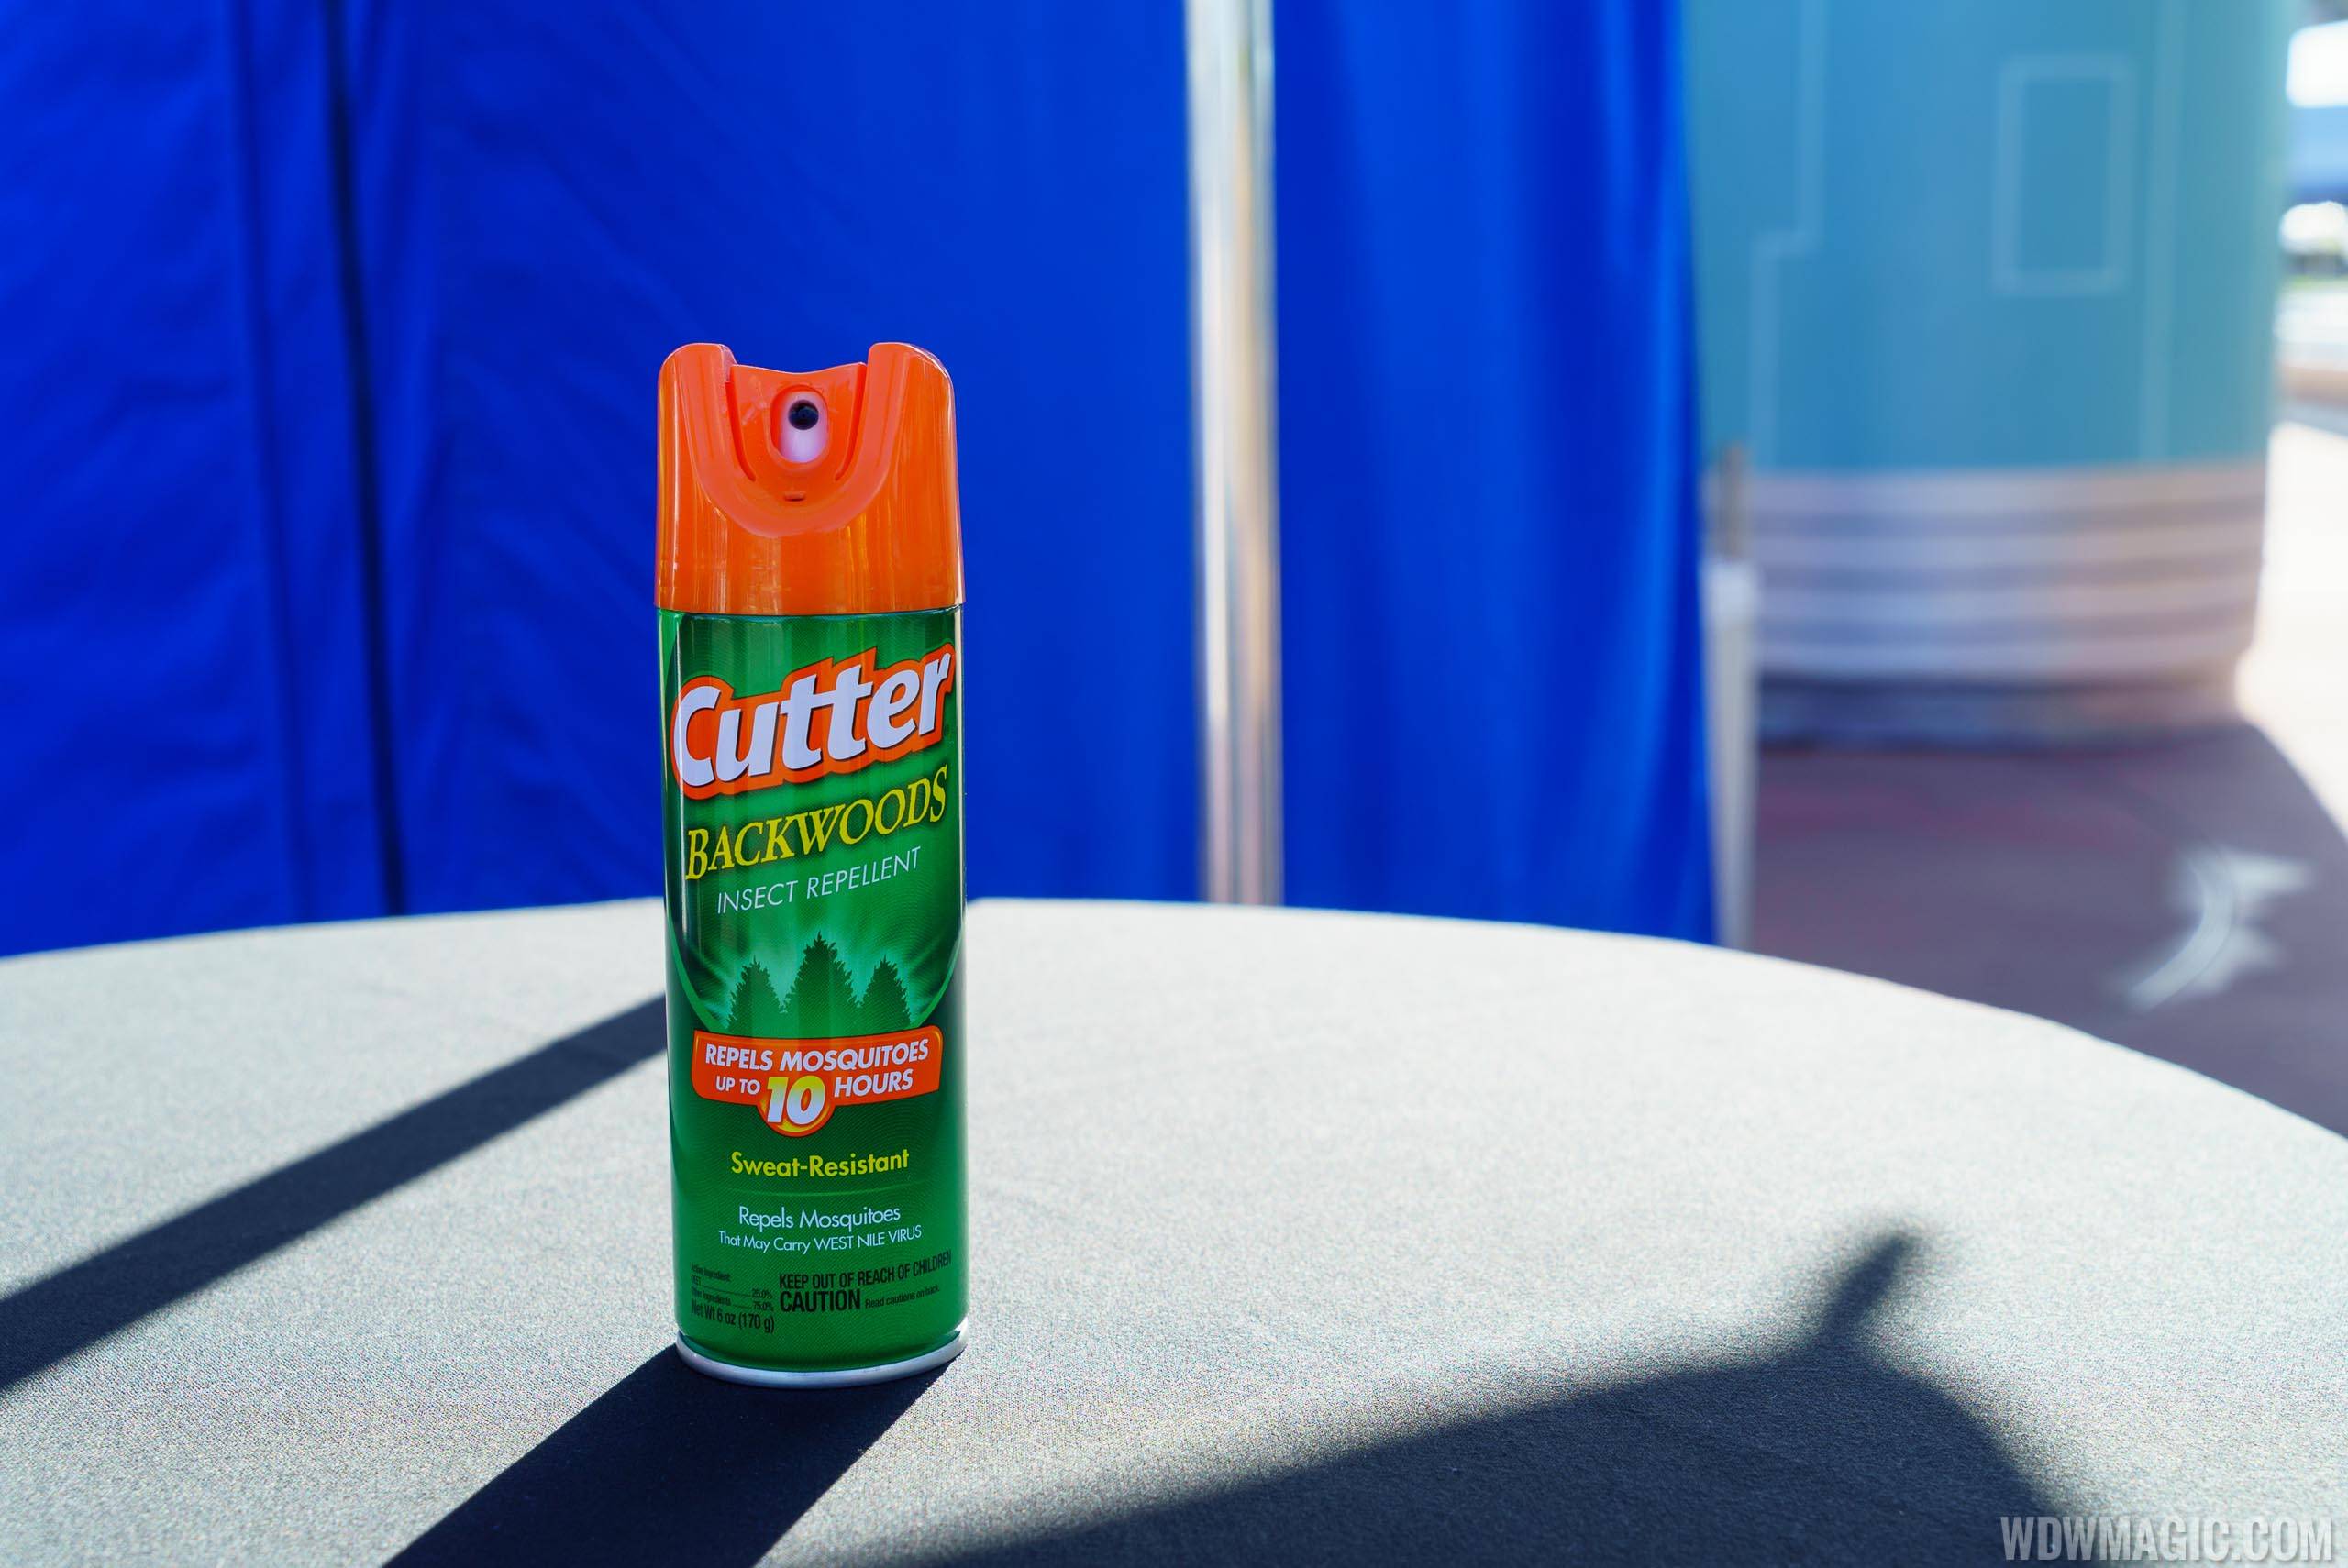 Free mosquito repellent offered to guests at Walt Disney World